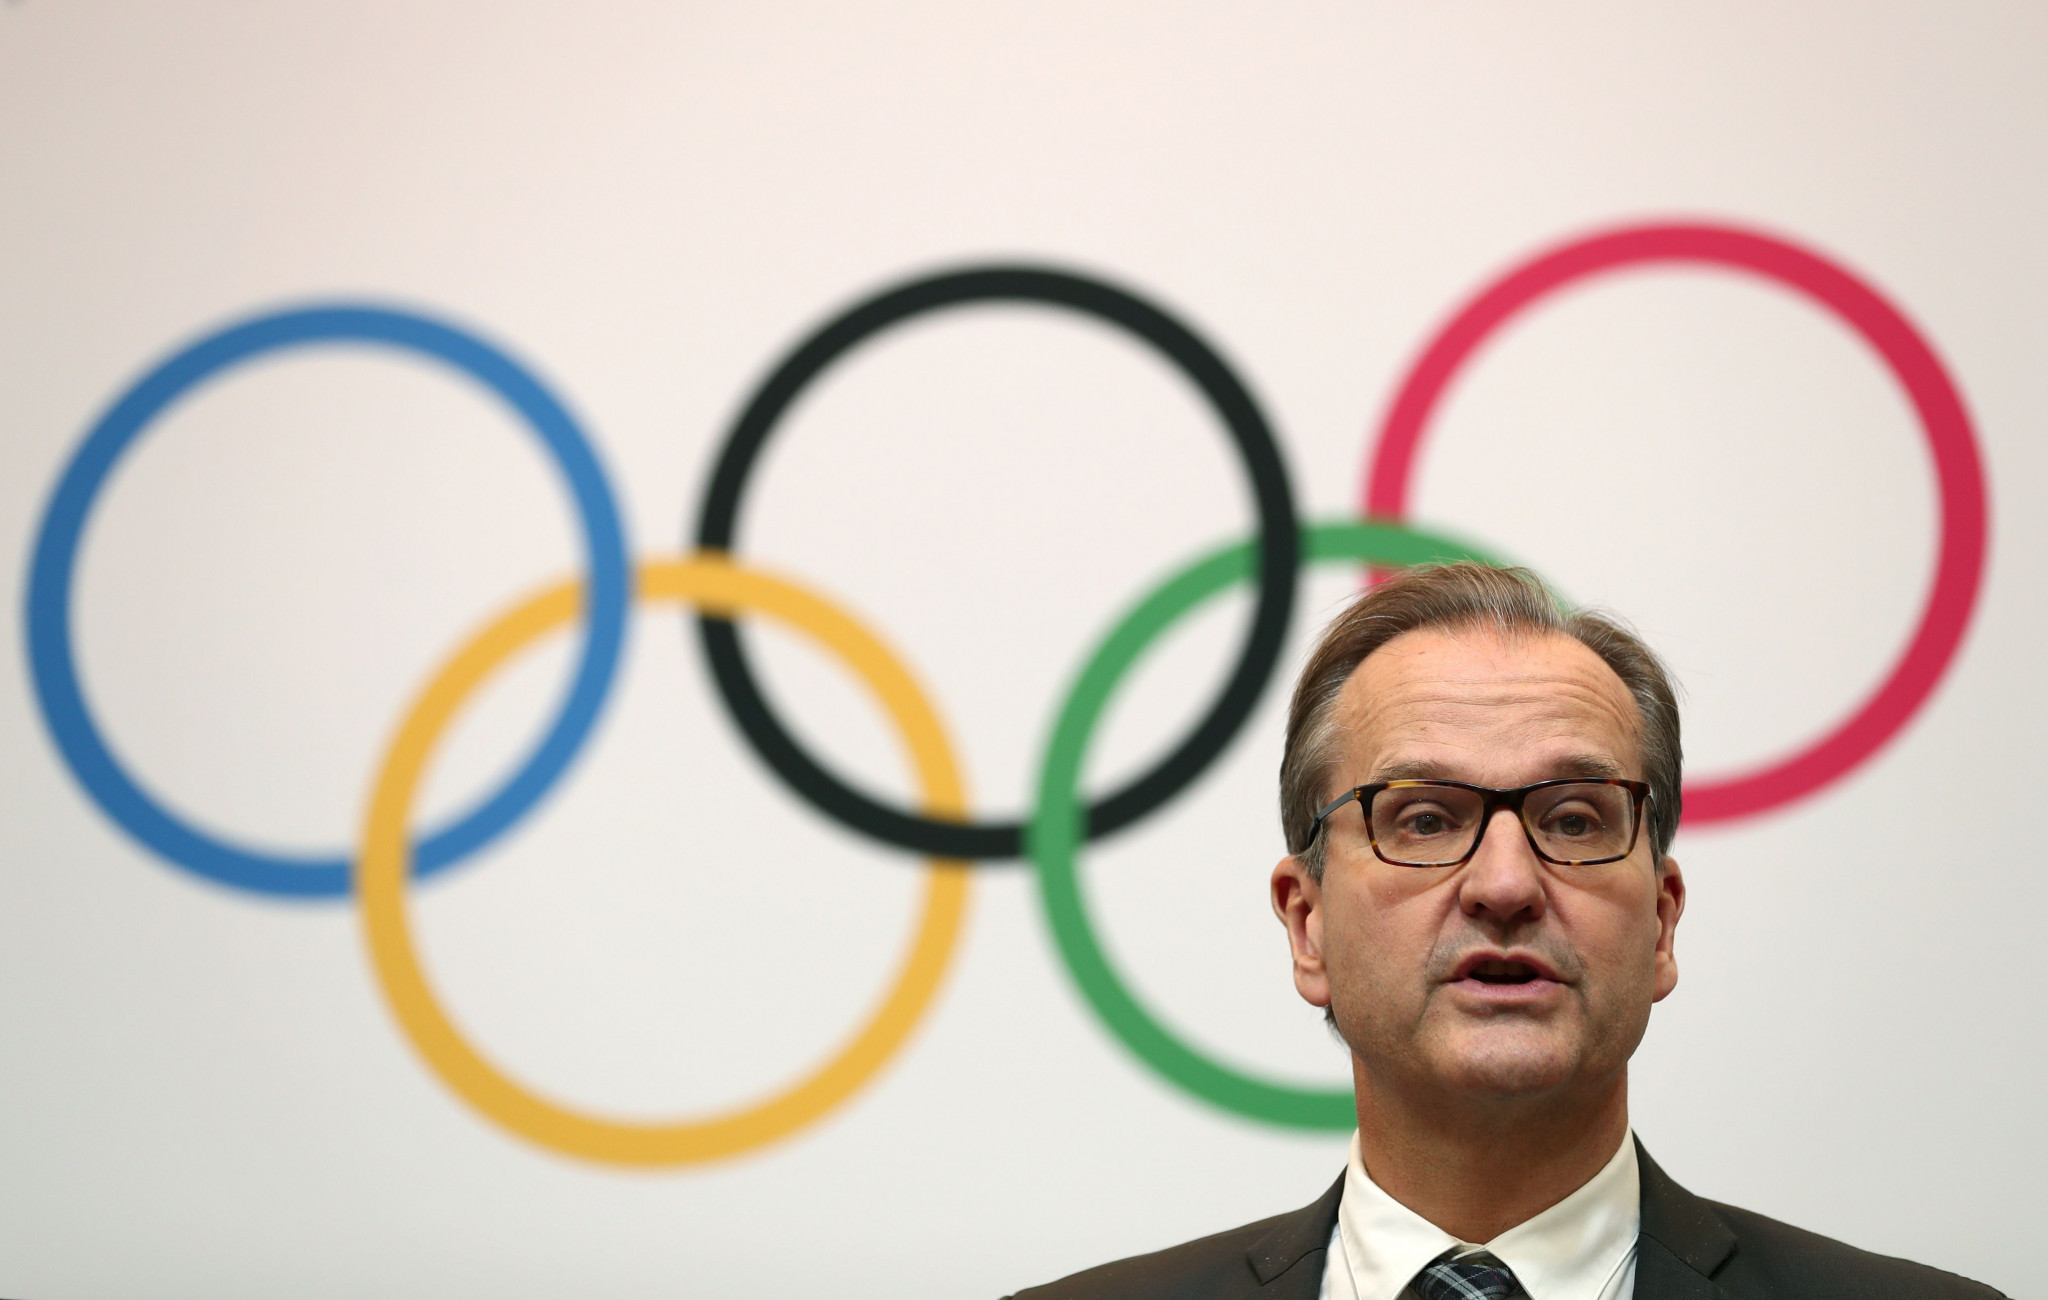 IOC, still no decision on Russians (and Belarus) for Paris 2024